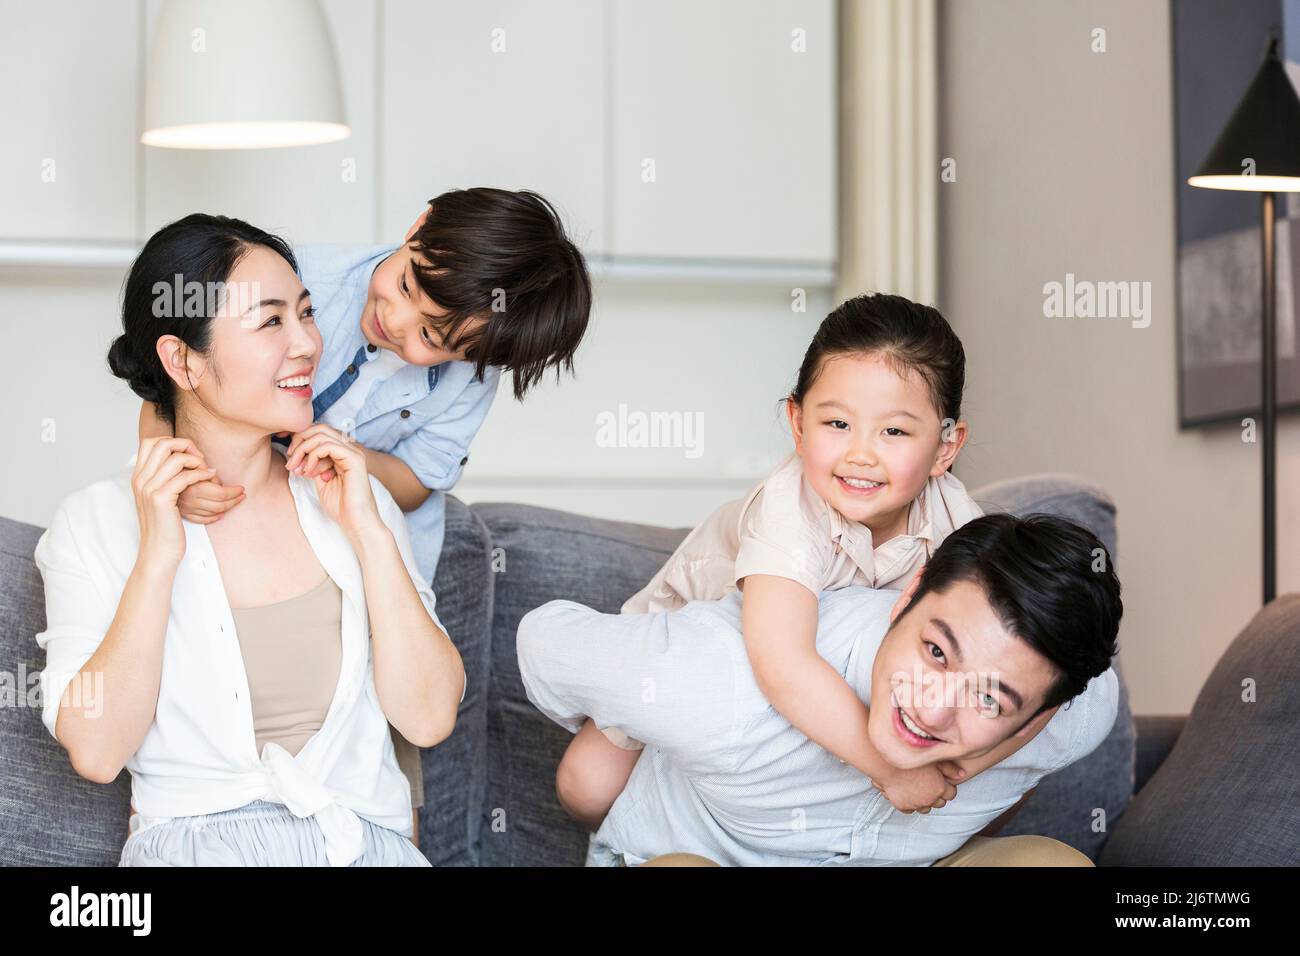 The father carries his daughter on his back, the son hugs the mother from behind, and the harmonious family plays on the sofa - stock photo Stock Photo